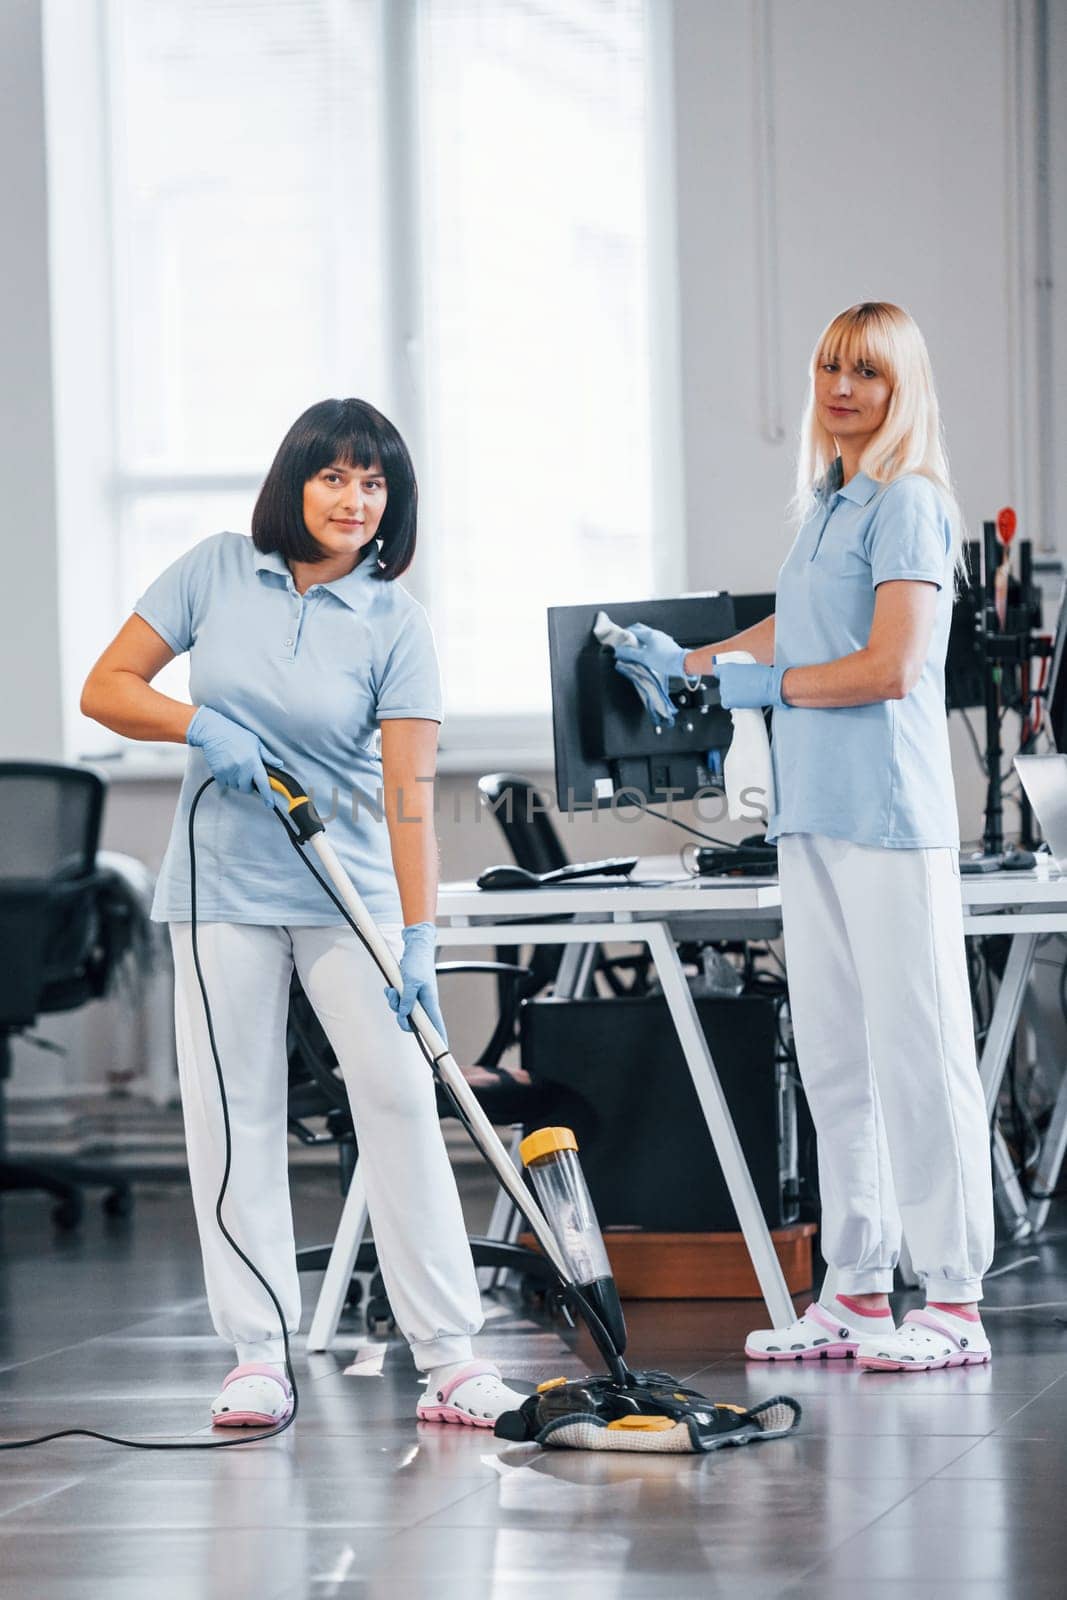 Woman uses vacuum cleaner. Group of workers clean modern office together at daytime by Standret